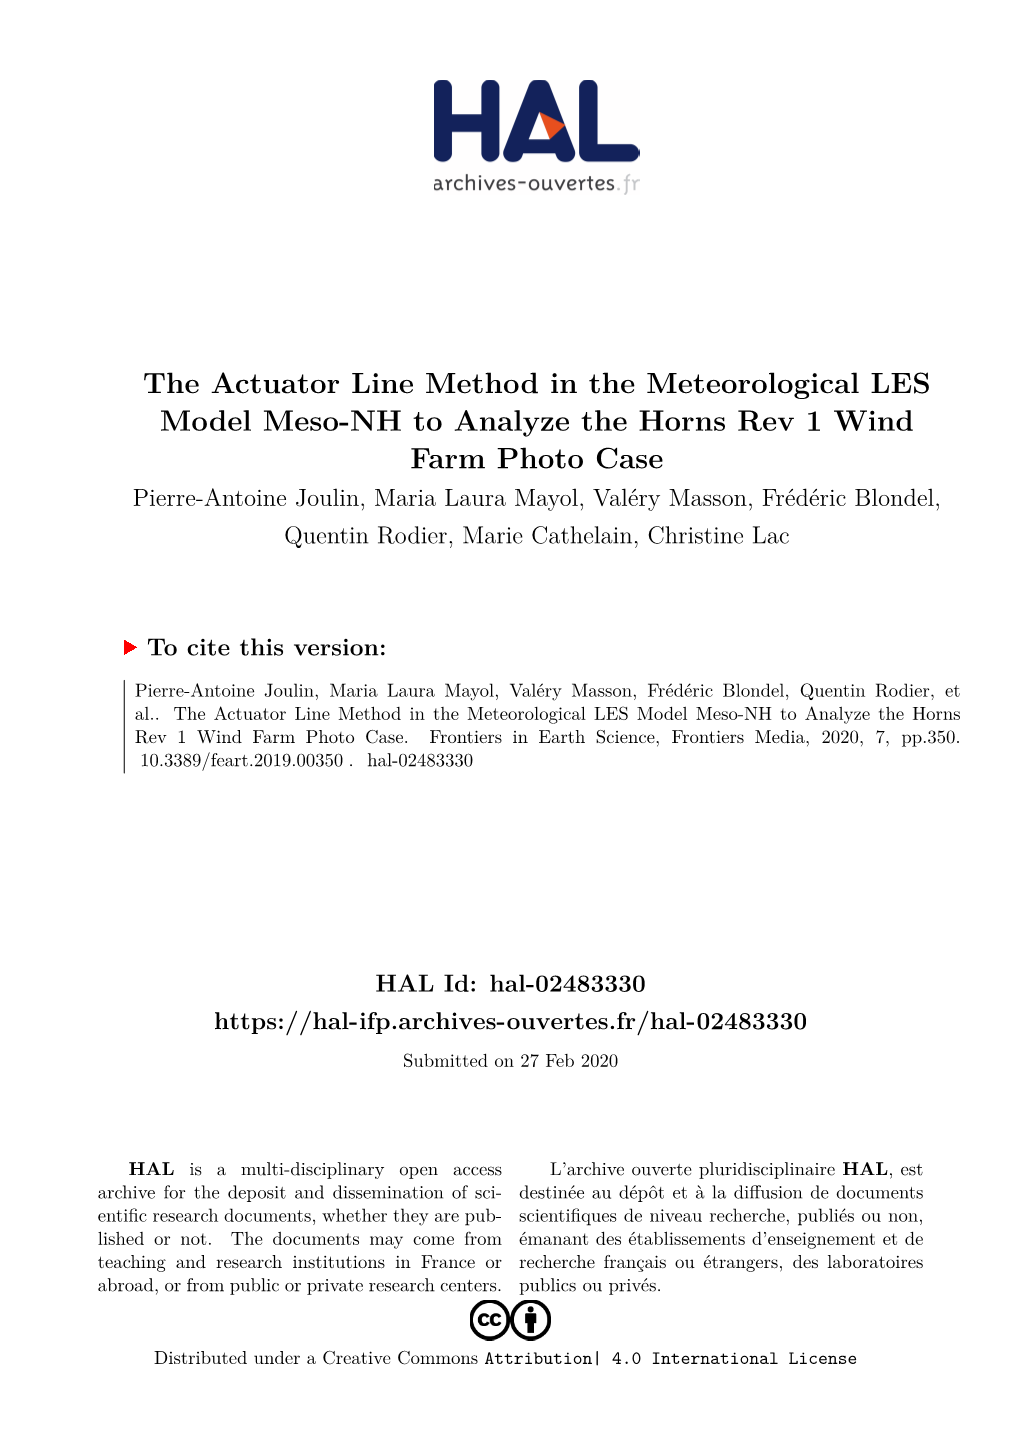 The Actuator Line Method in the Meteorological LES Model Meso-NH to Analyze the Horns Rev 1 Wind Farm Photo Case